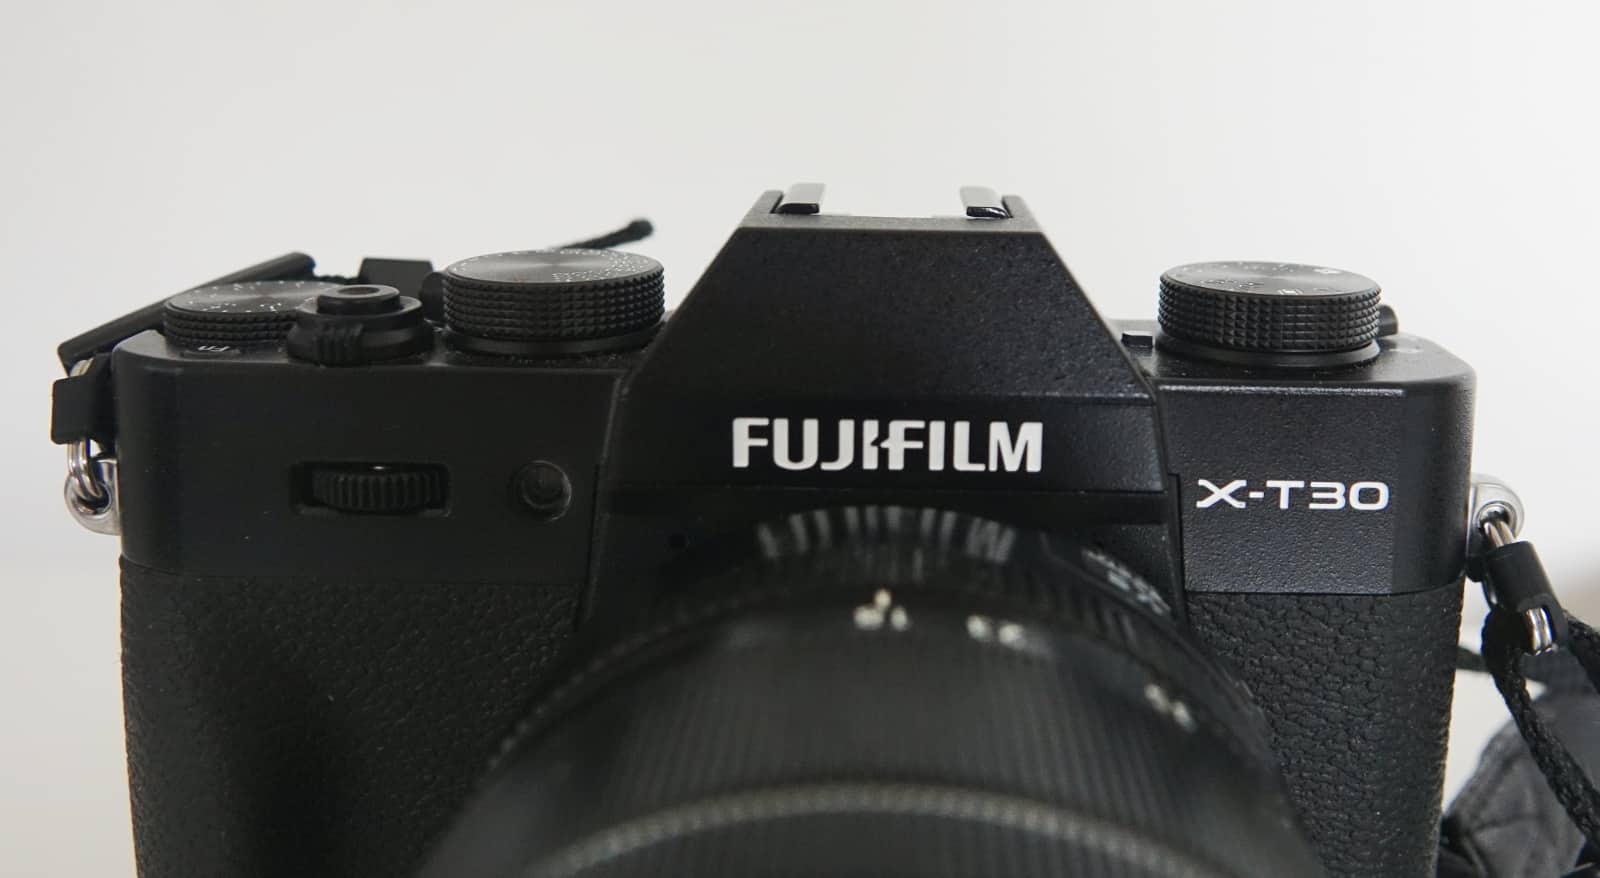 Fujifilm X-T30 Leather Case | The best protection of XT30